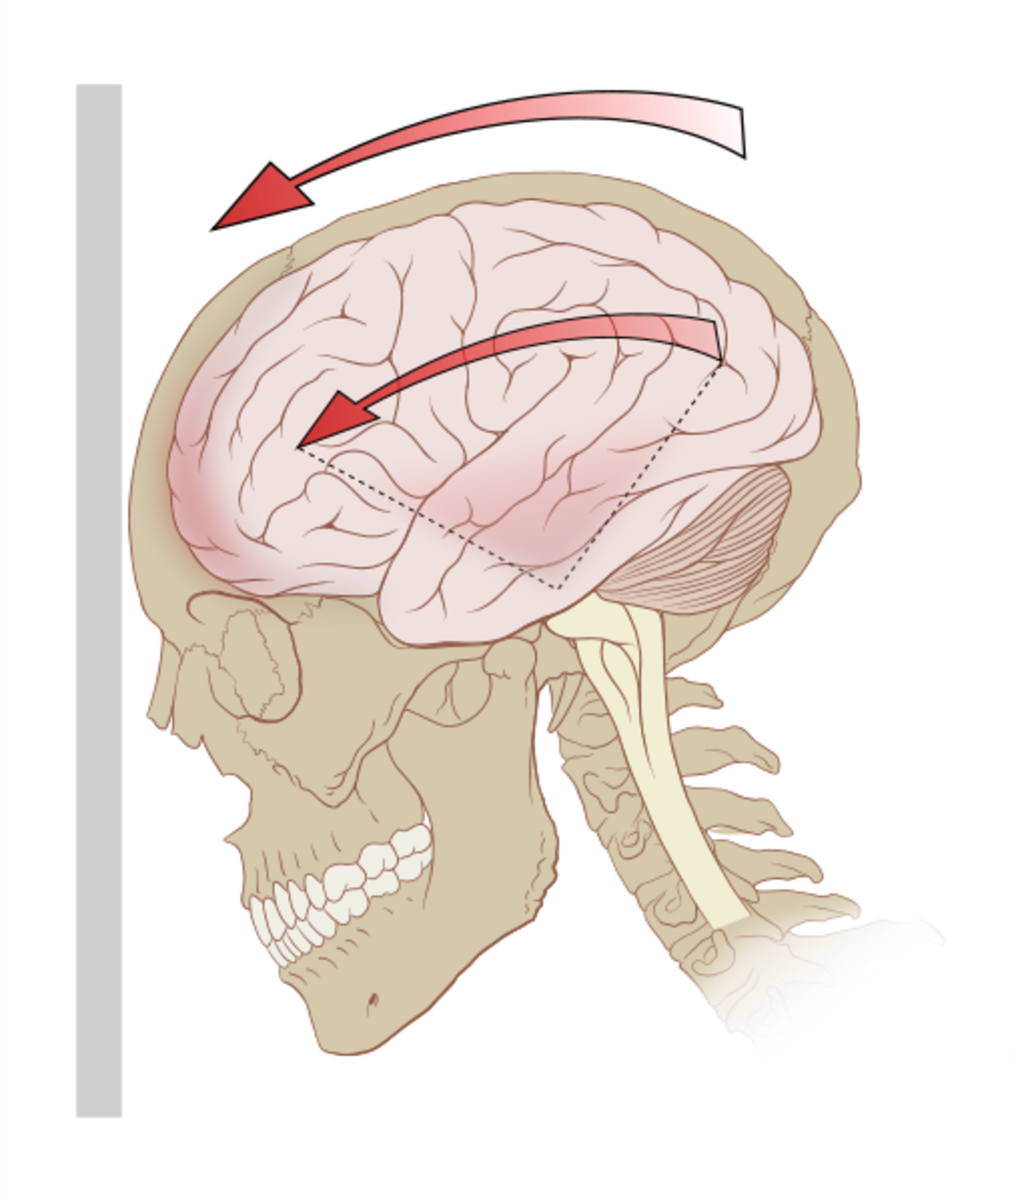 A diagram of the forces on the brain in concussion